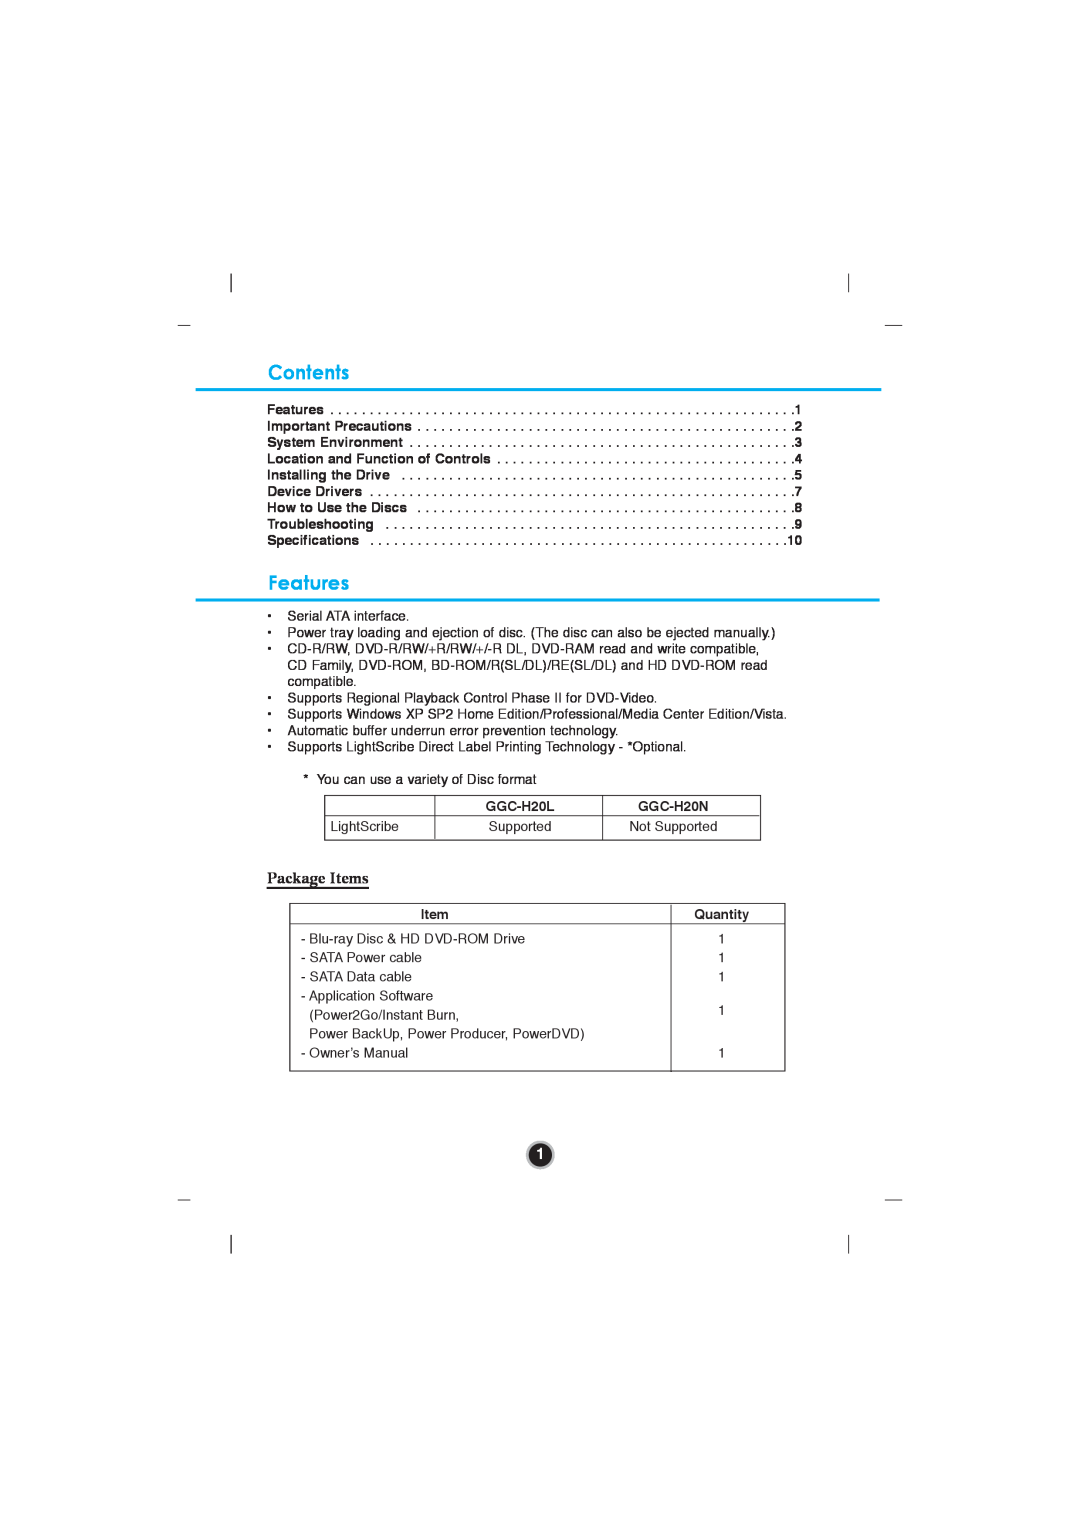 LG Electronics GGC-H20L owner manual Contents, Features, Package Items, GGC-H20N, LightScribe, Quantity 